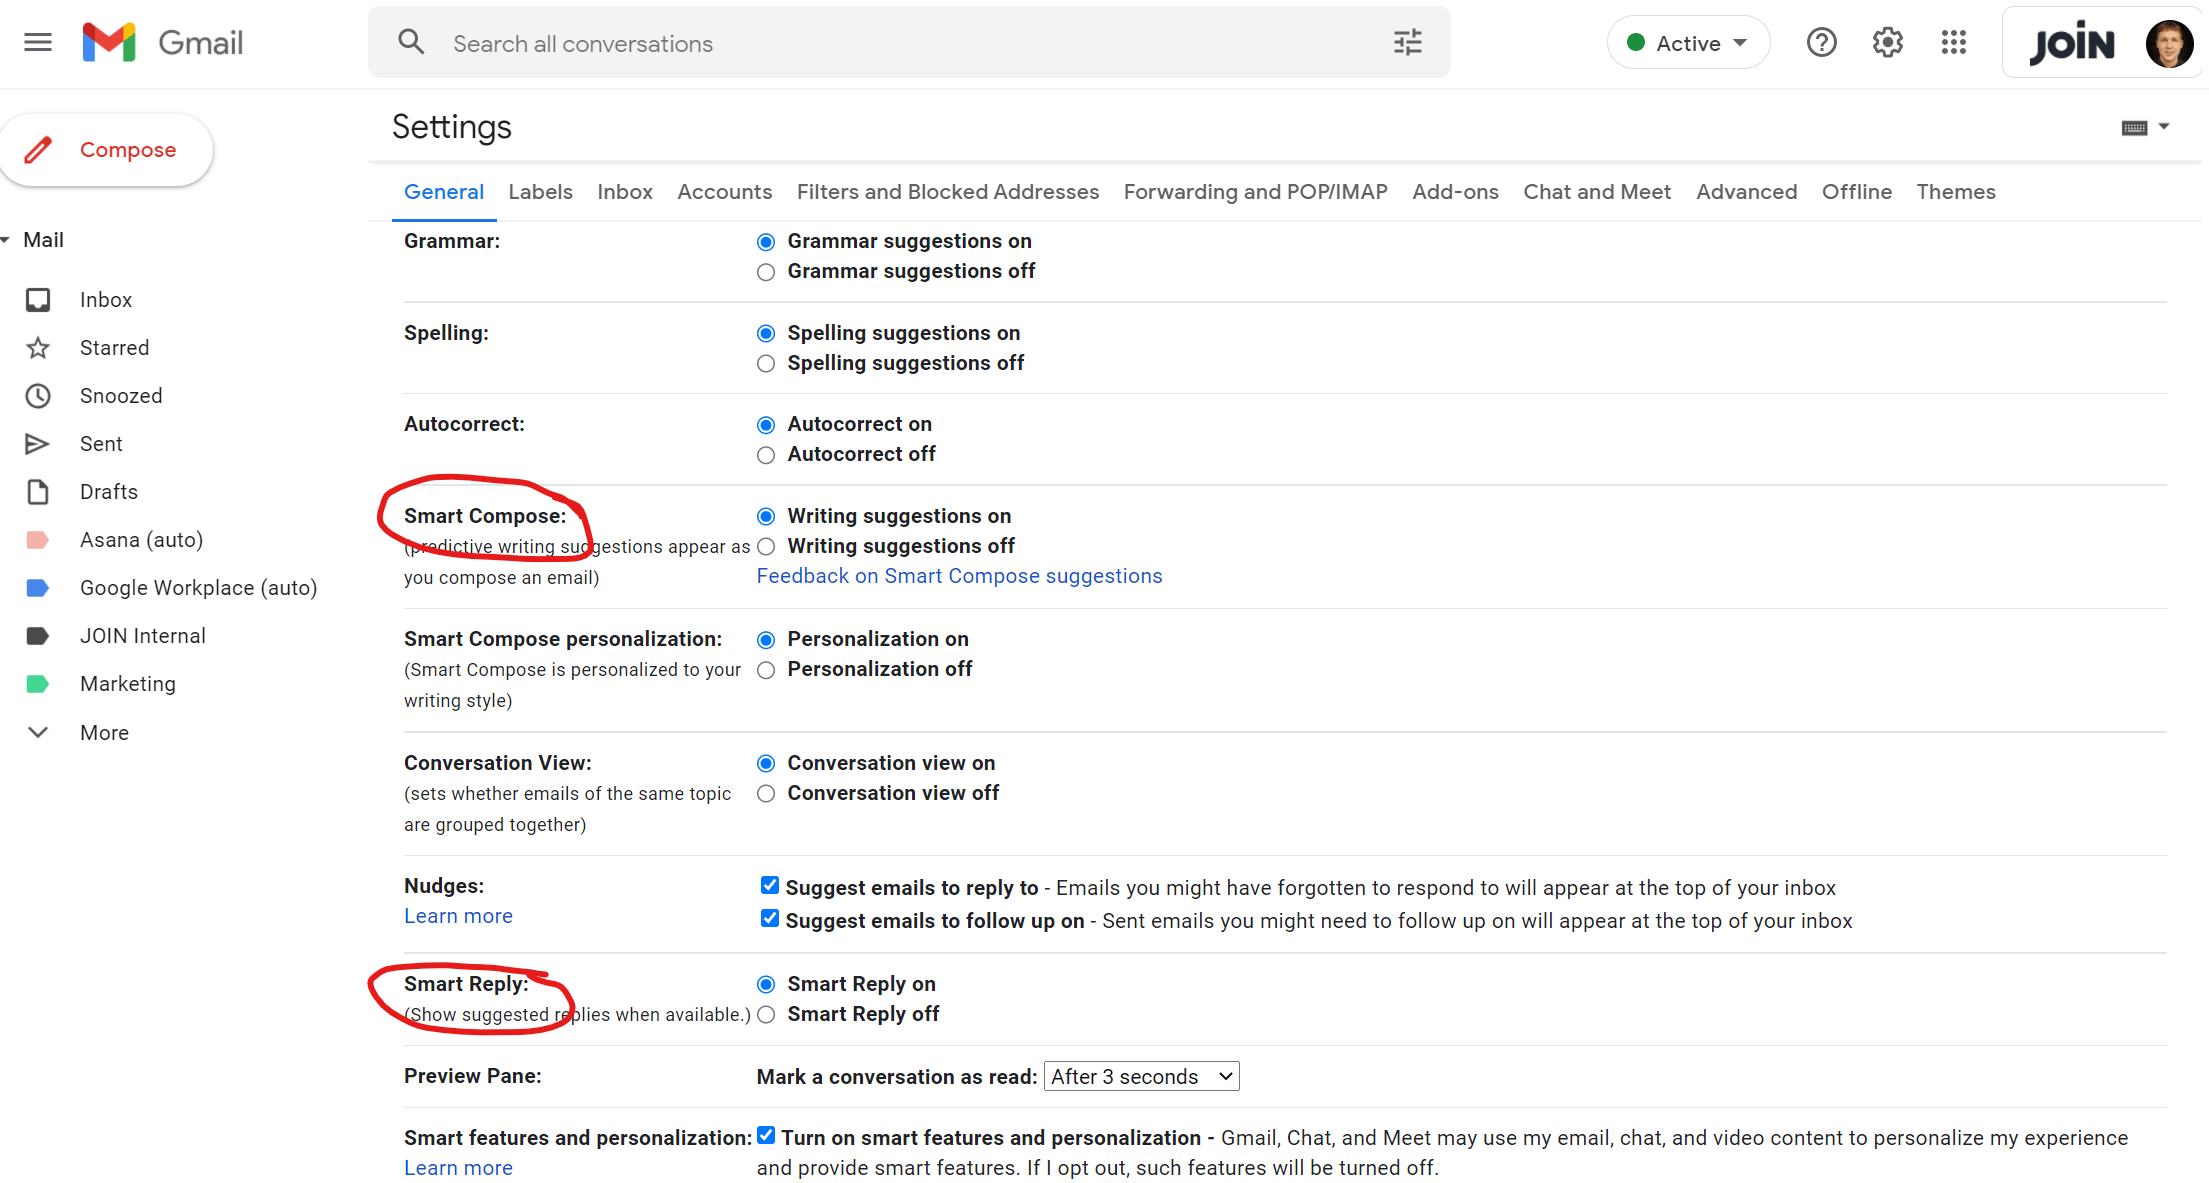 Screenshot of Gmail’s Settings menu with two drawn circles highlighting the mentioned email tricks